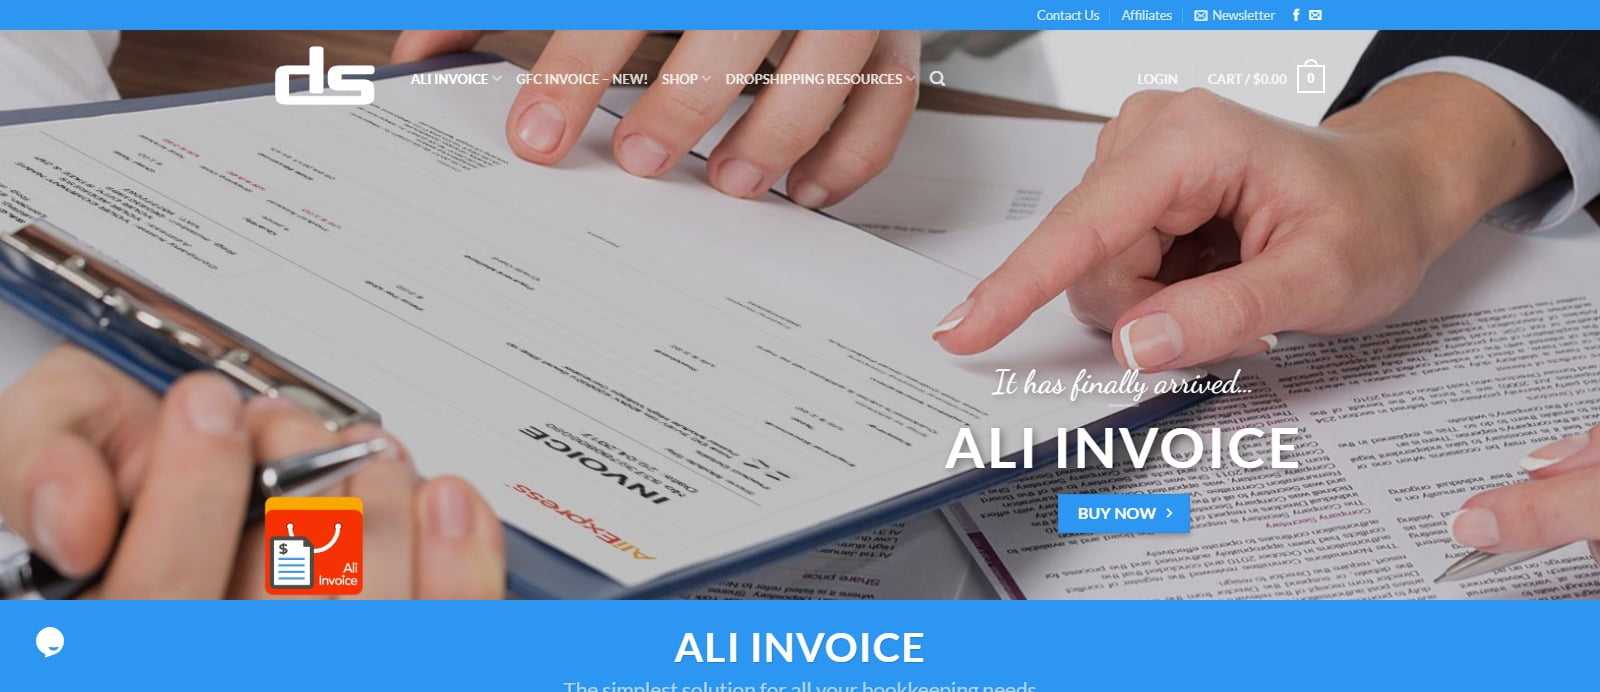 Drop shipping Affiliates Program Review: 25% of the AliExpress Invoice Extension